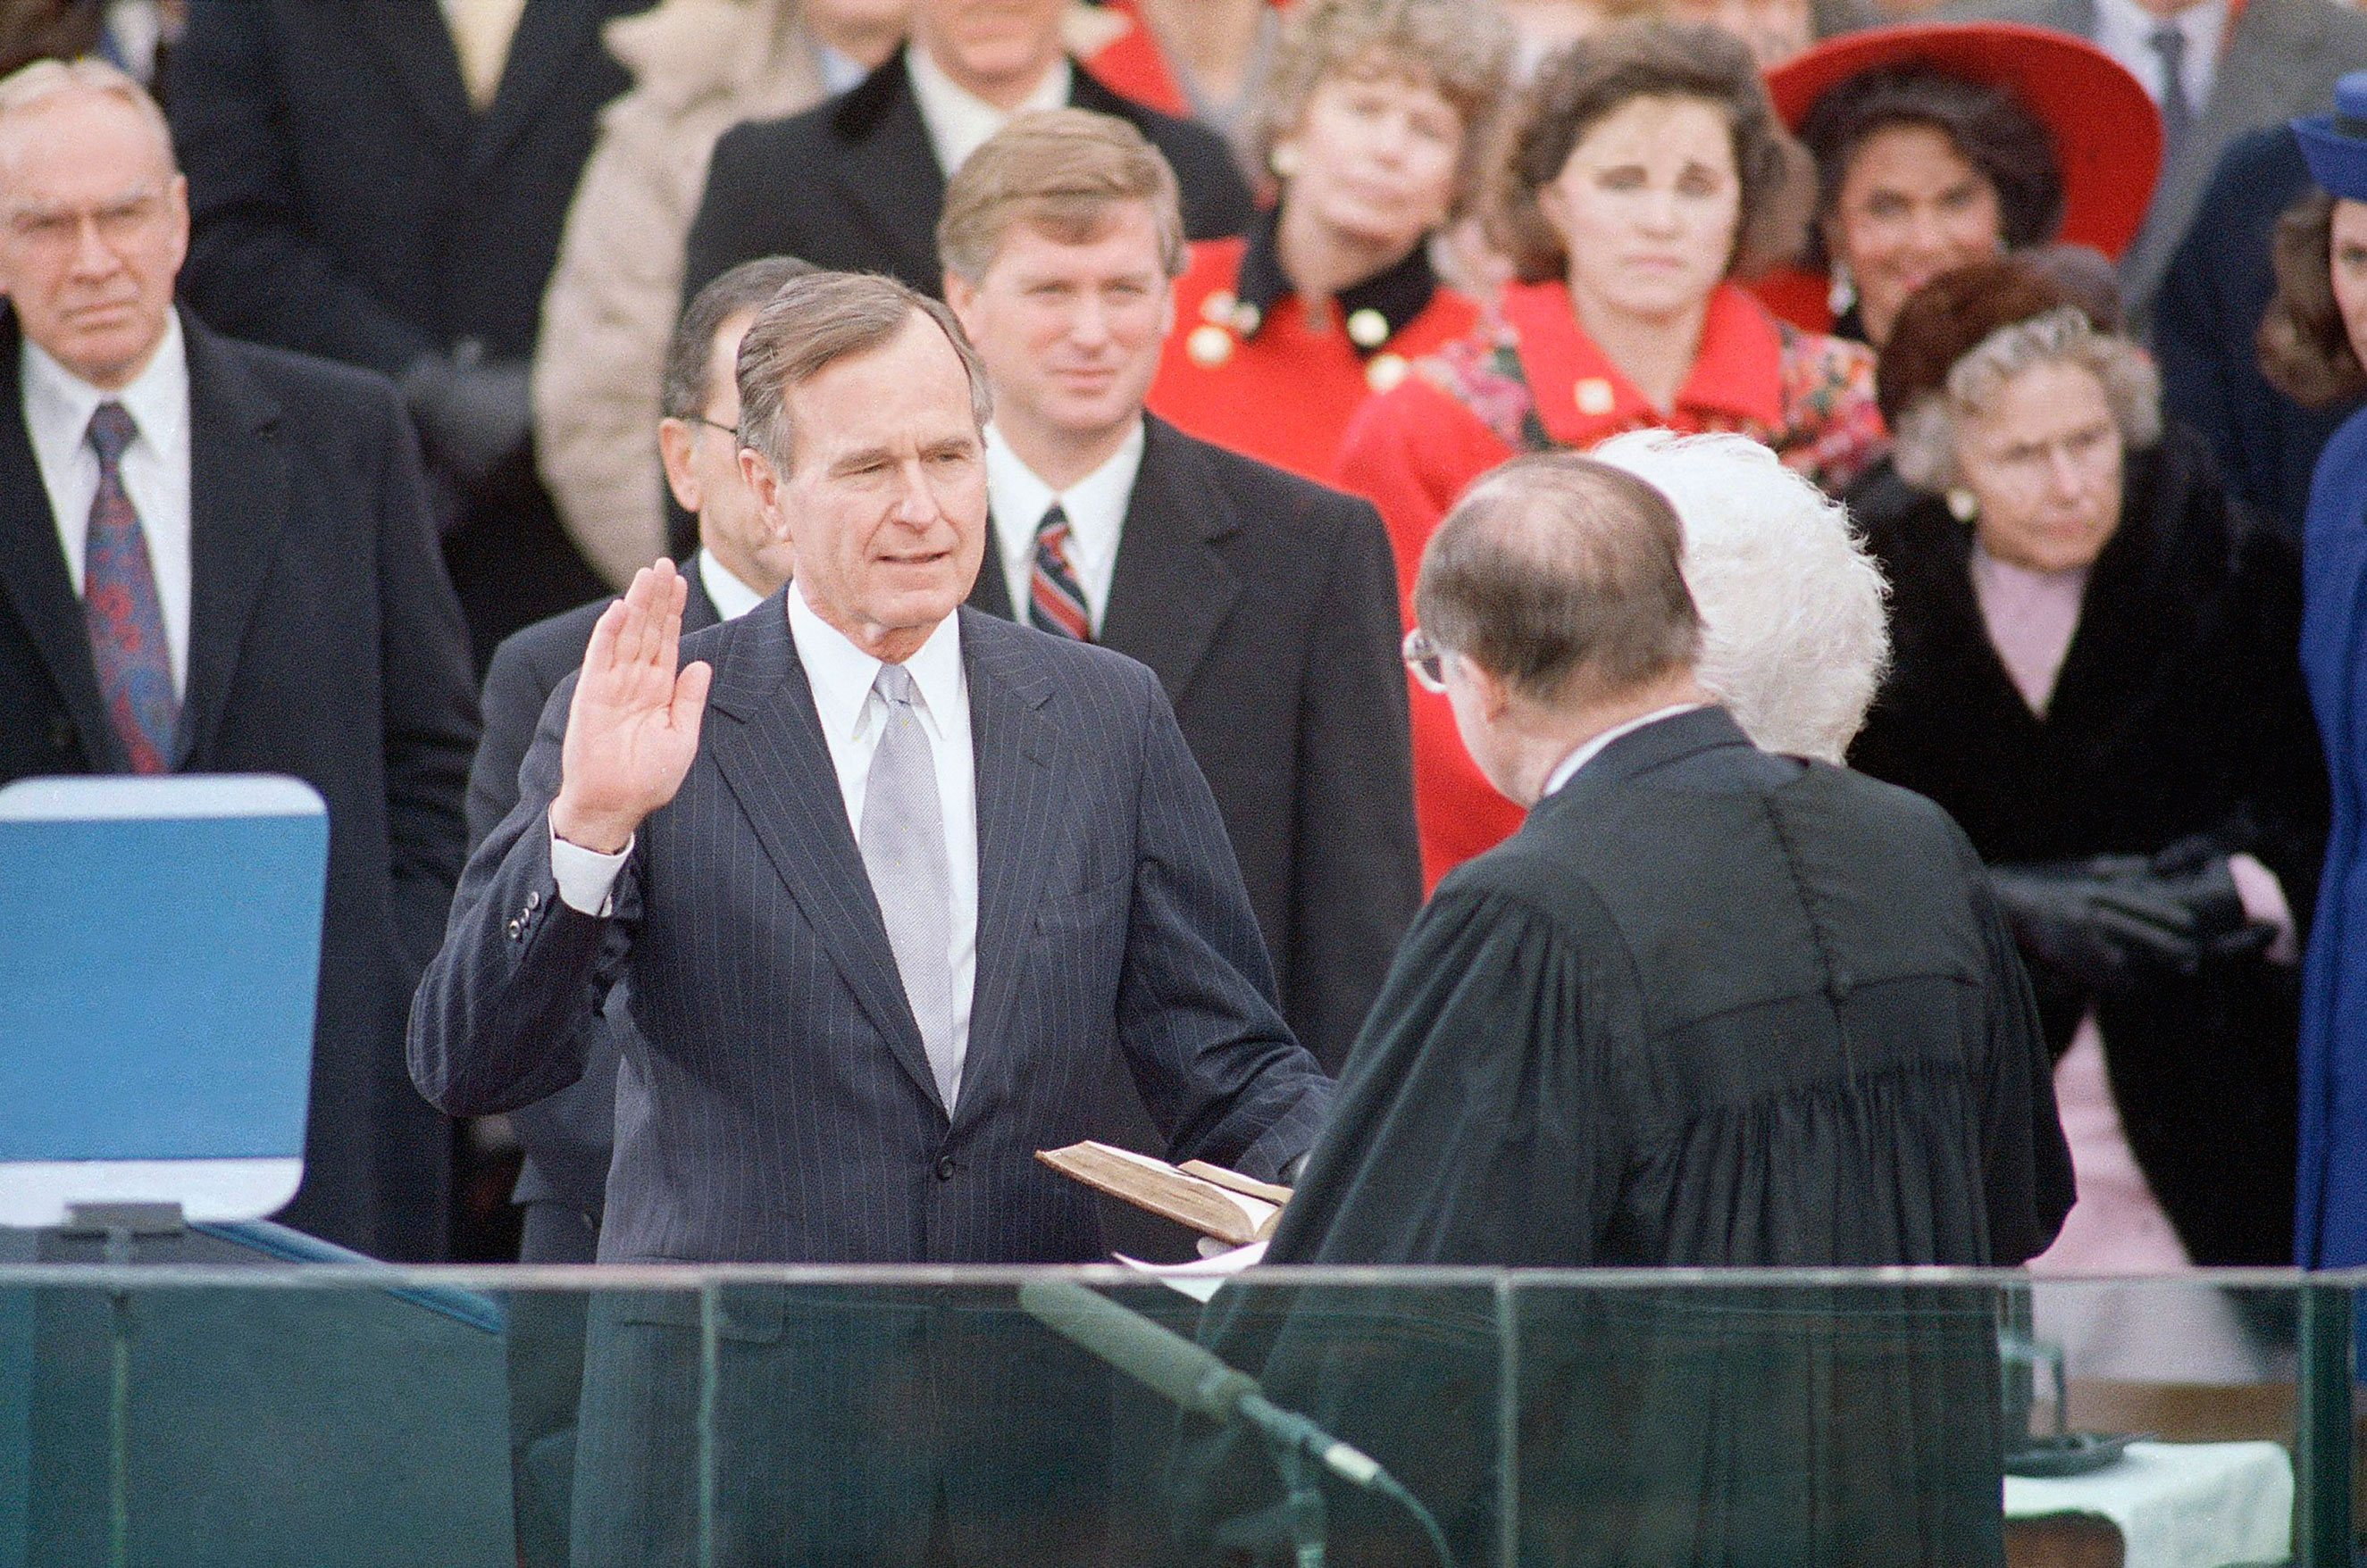 President George H. W. Bush raises his hand as he takes the oath of office as President of the United States outside the Capitol on Jan. 20, 1989, Washington, D.C. (Ron Edmonds—AP)